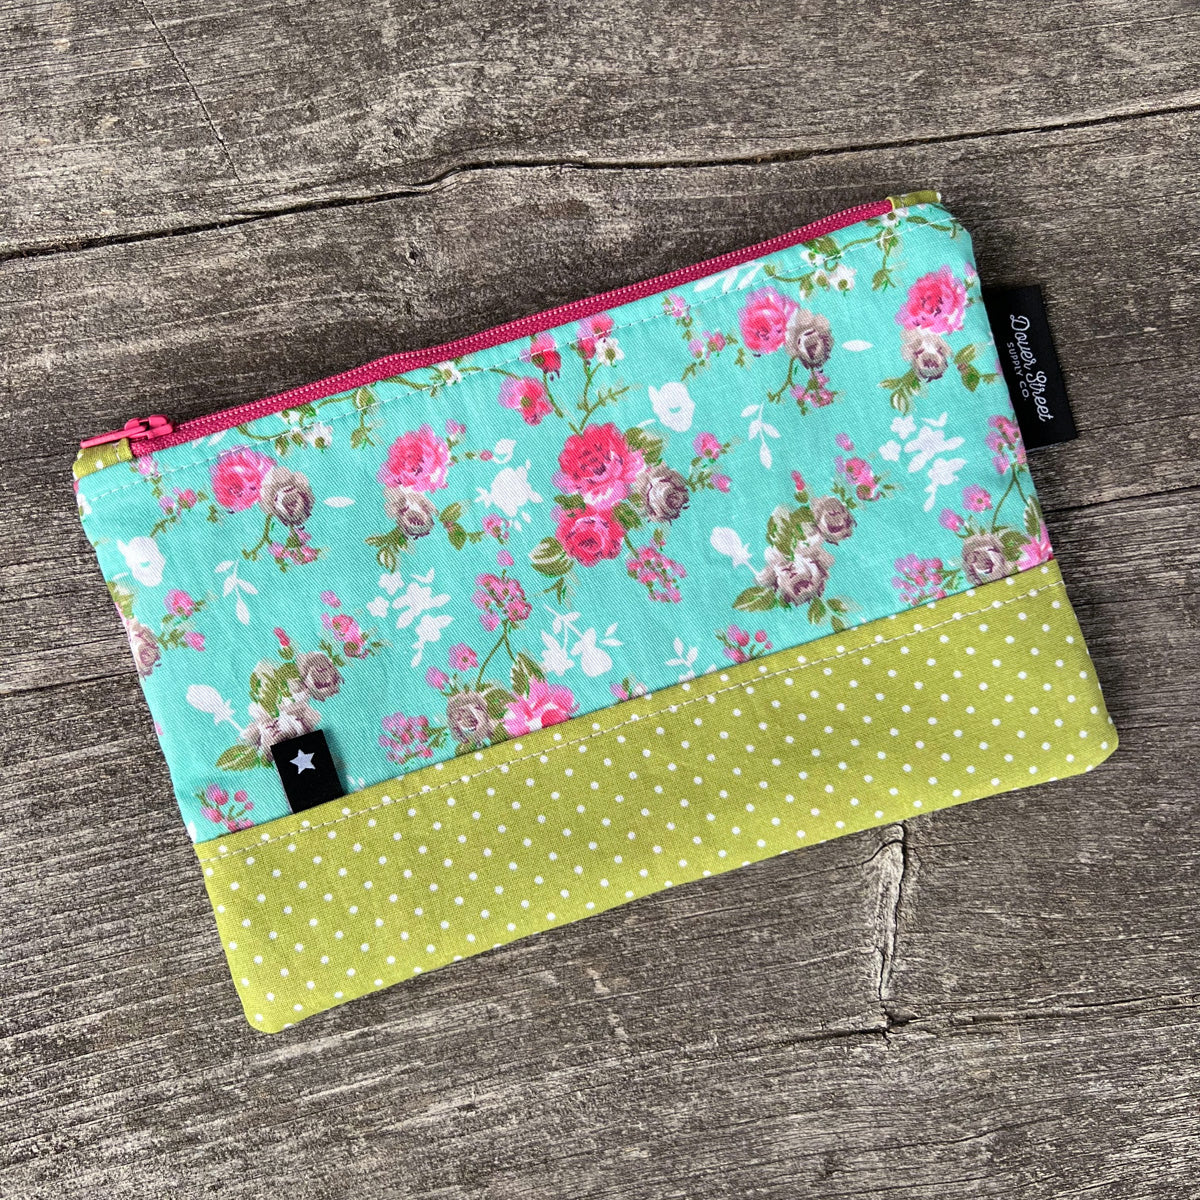 Blue Floral Notions Pouch - Small